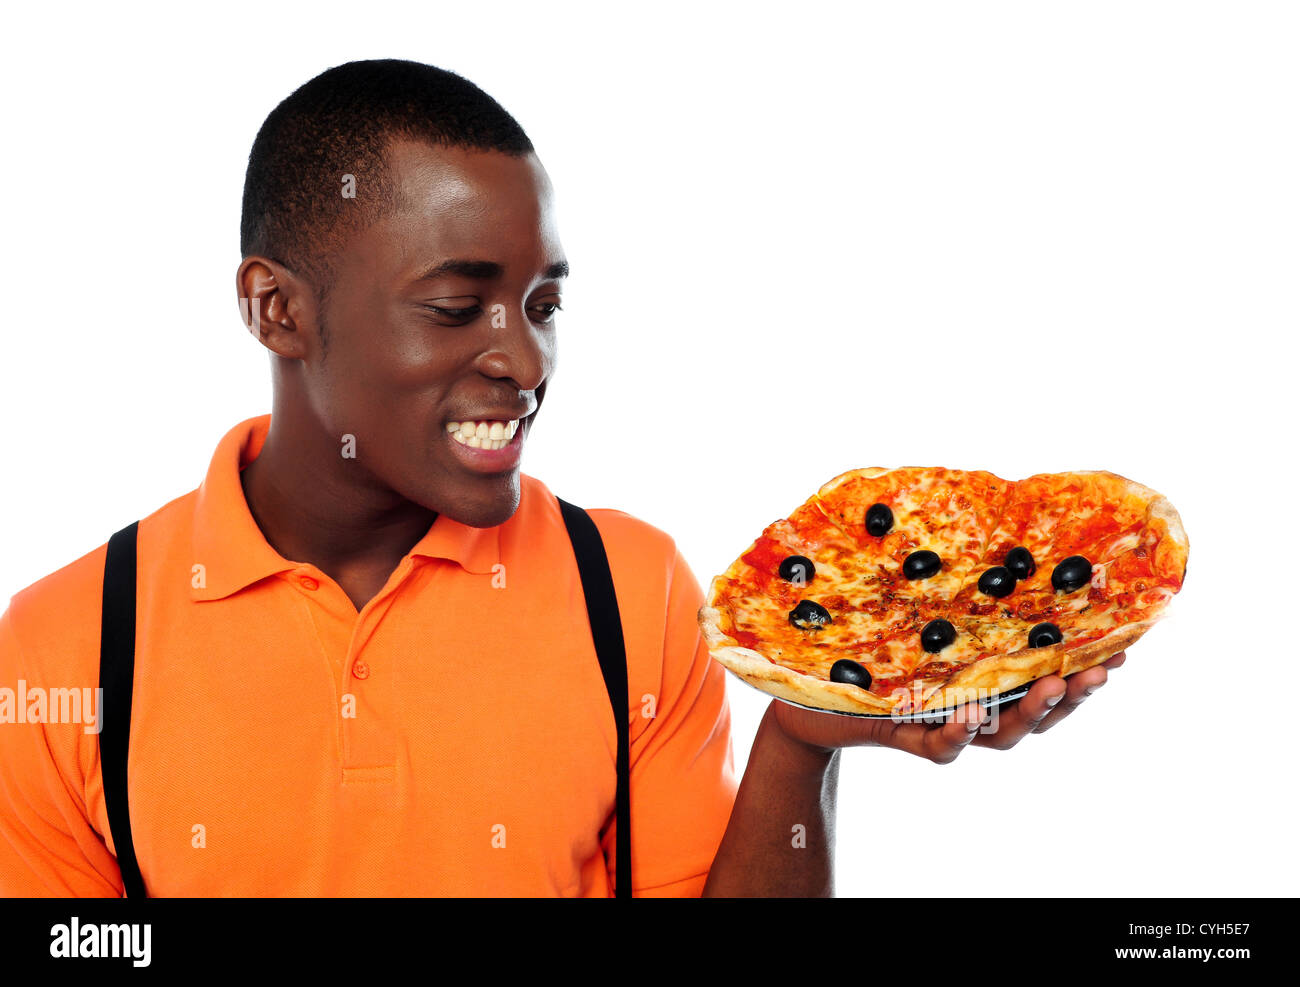 Smiling young black man holding yummy pizza against white background Stock Photo